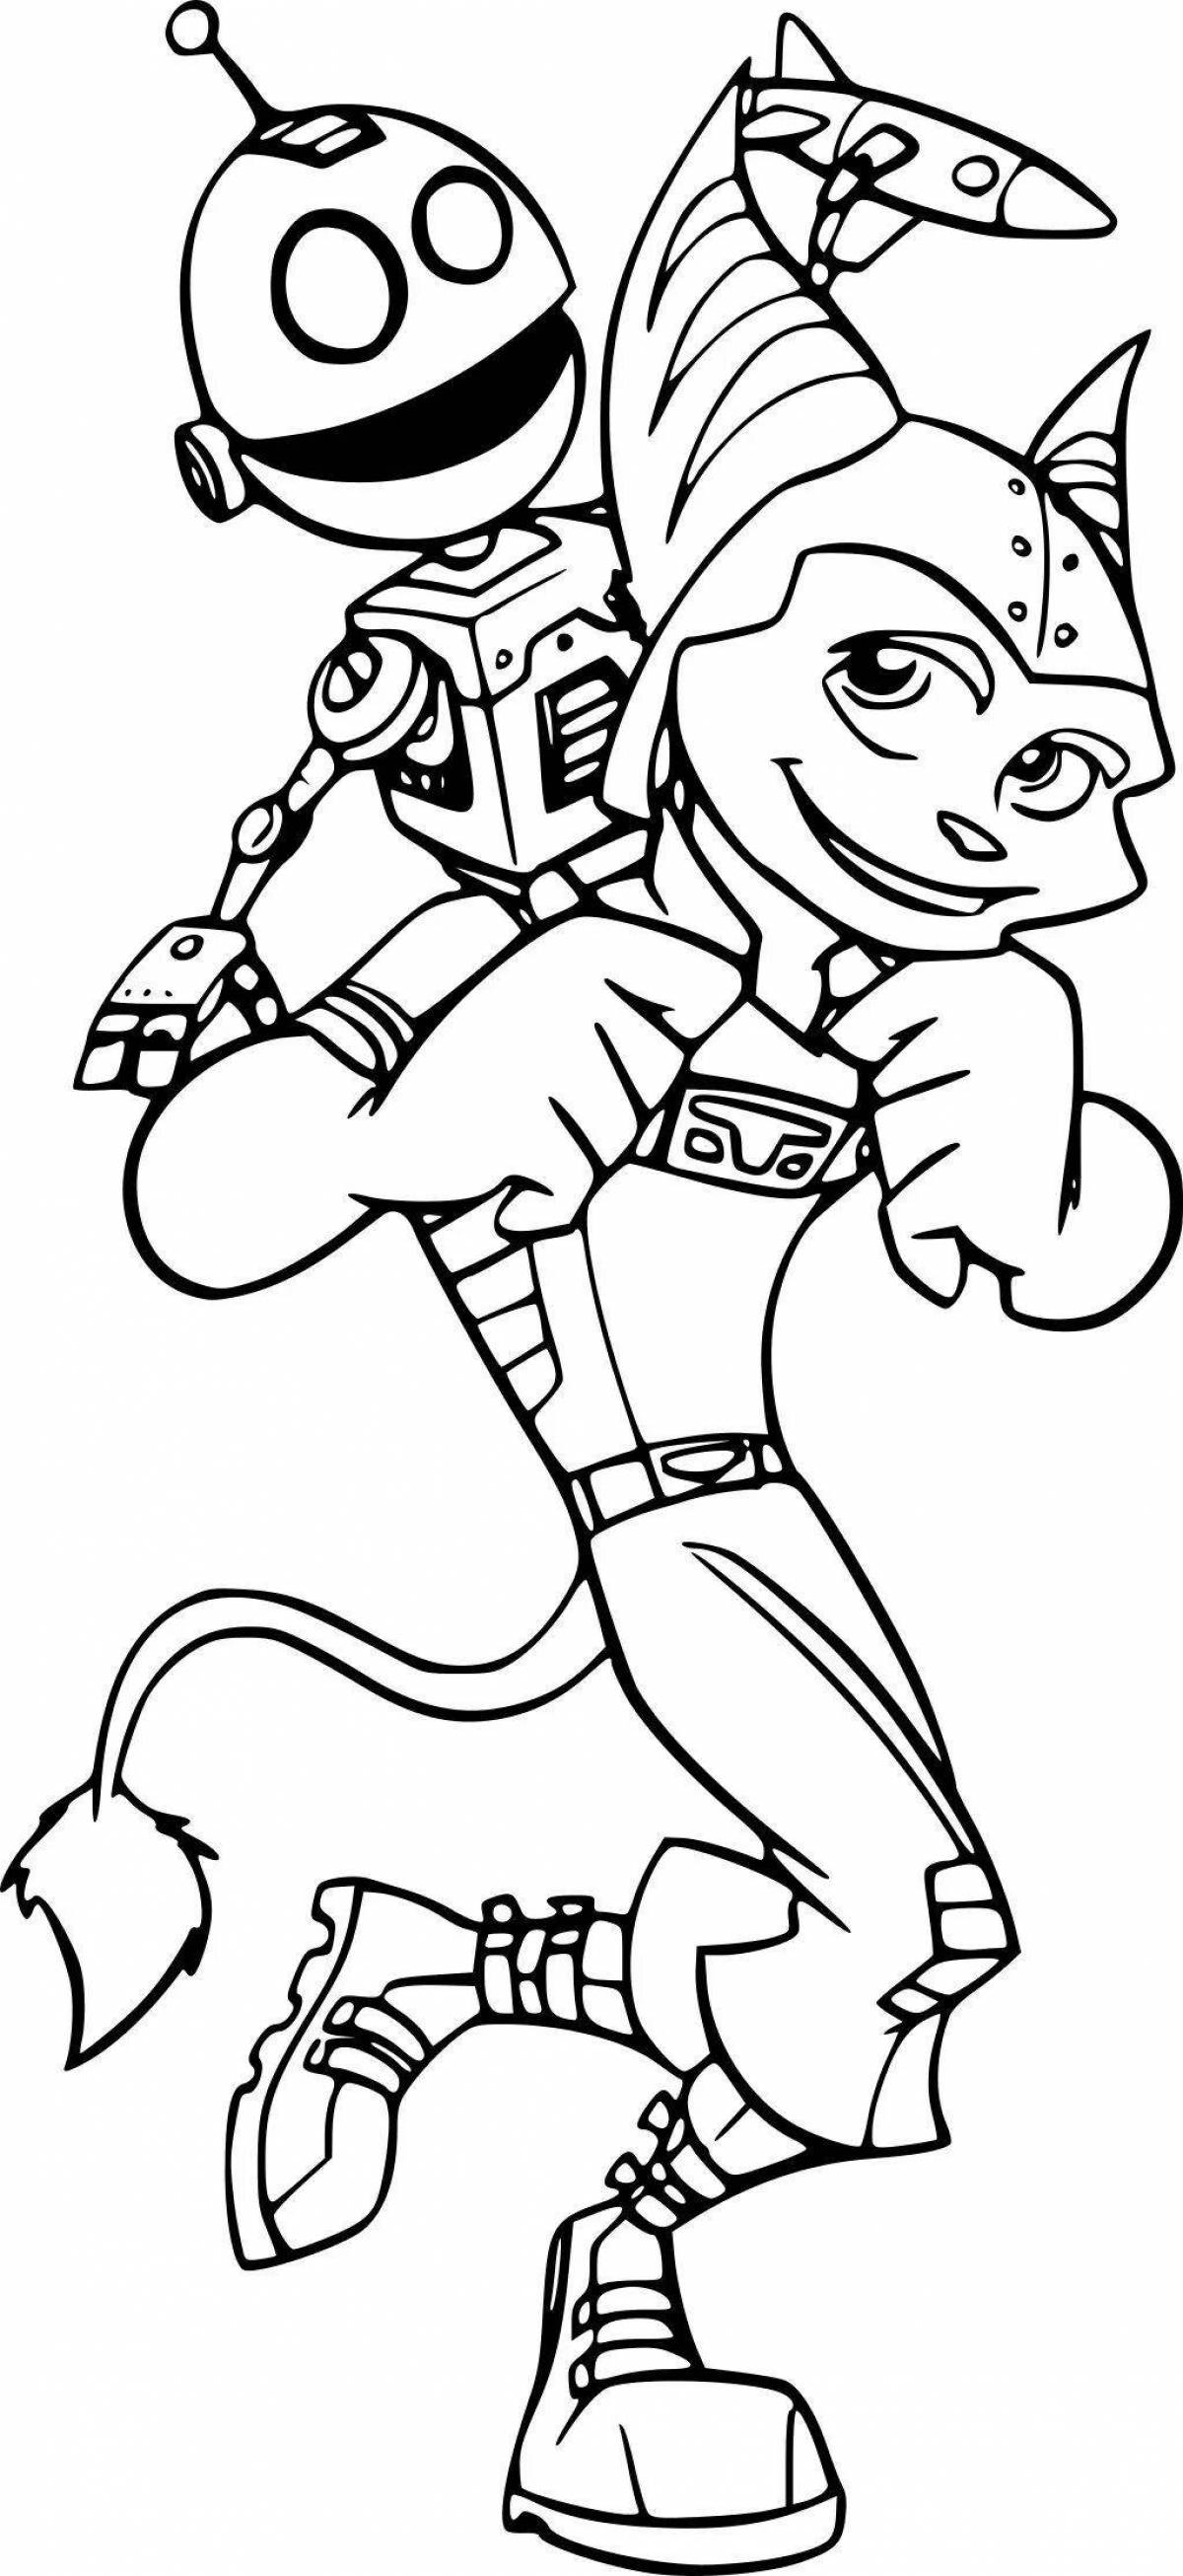 Intriguing ratchet and clank coloring book